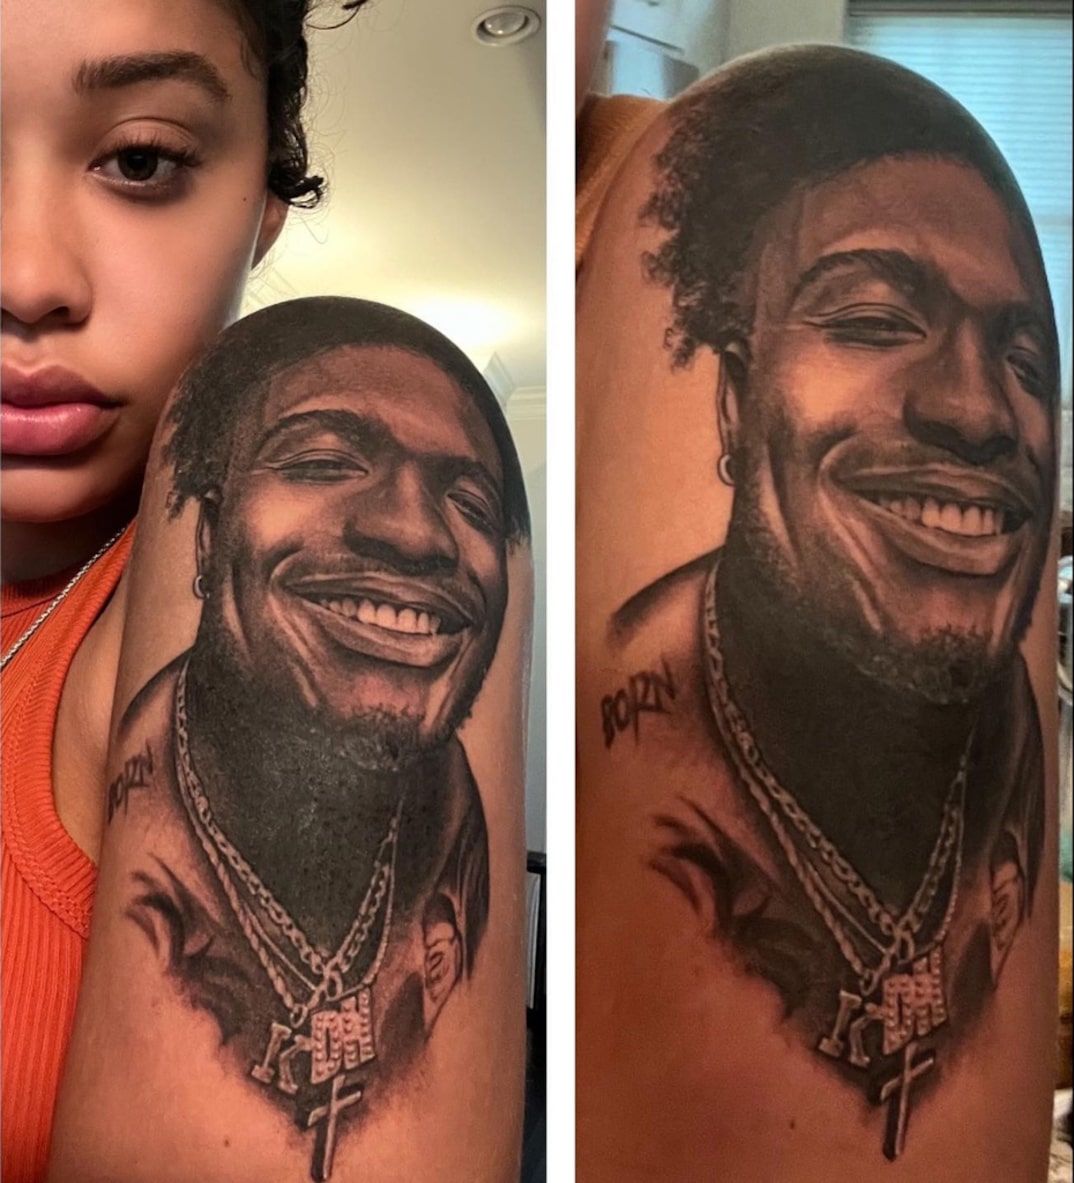 Dwayne Haskins' tattoo on his wife's arm